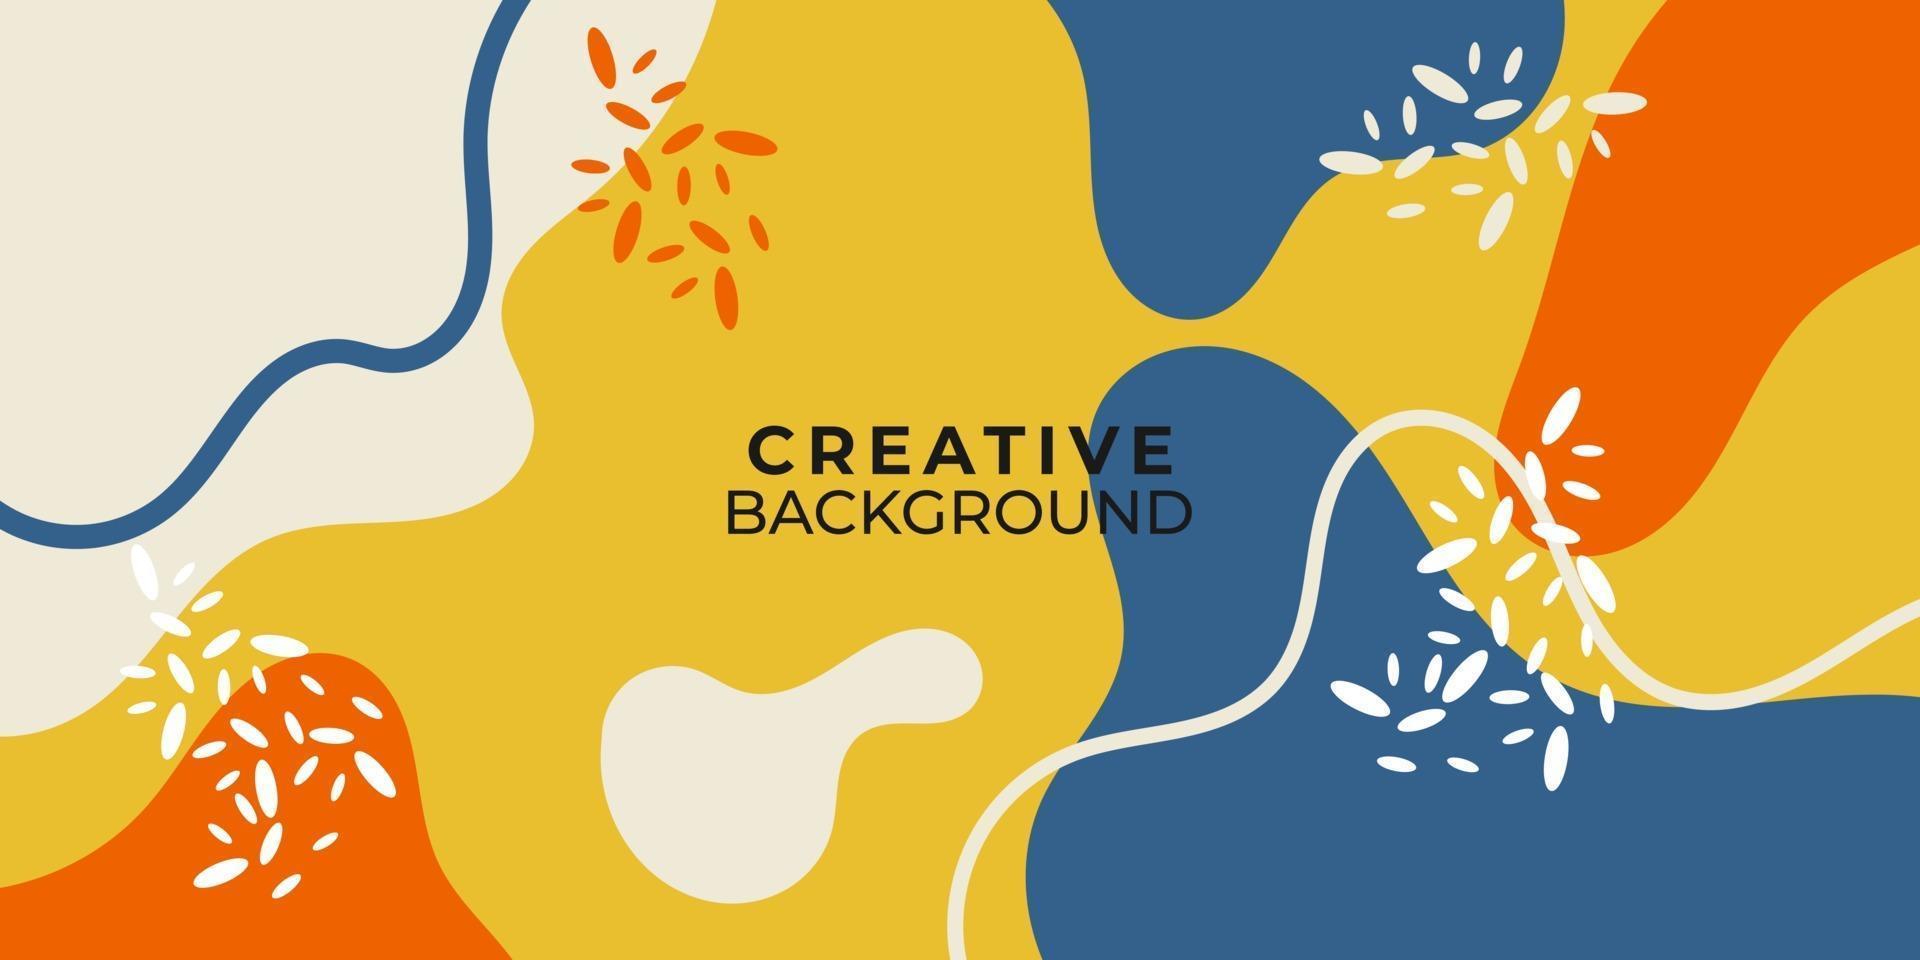 Creative hand drawn abstract background design vector